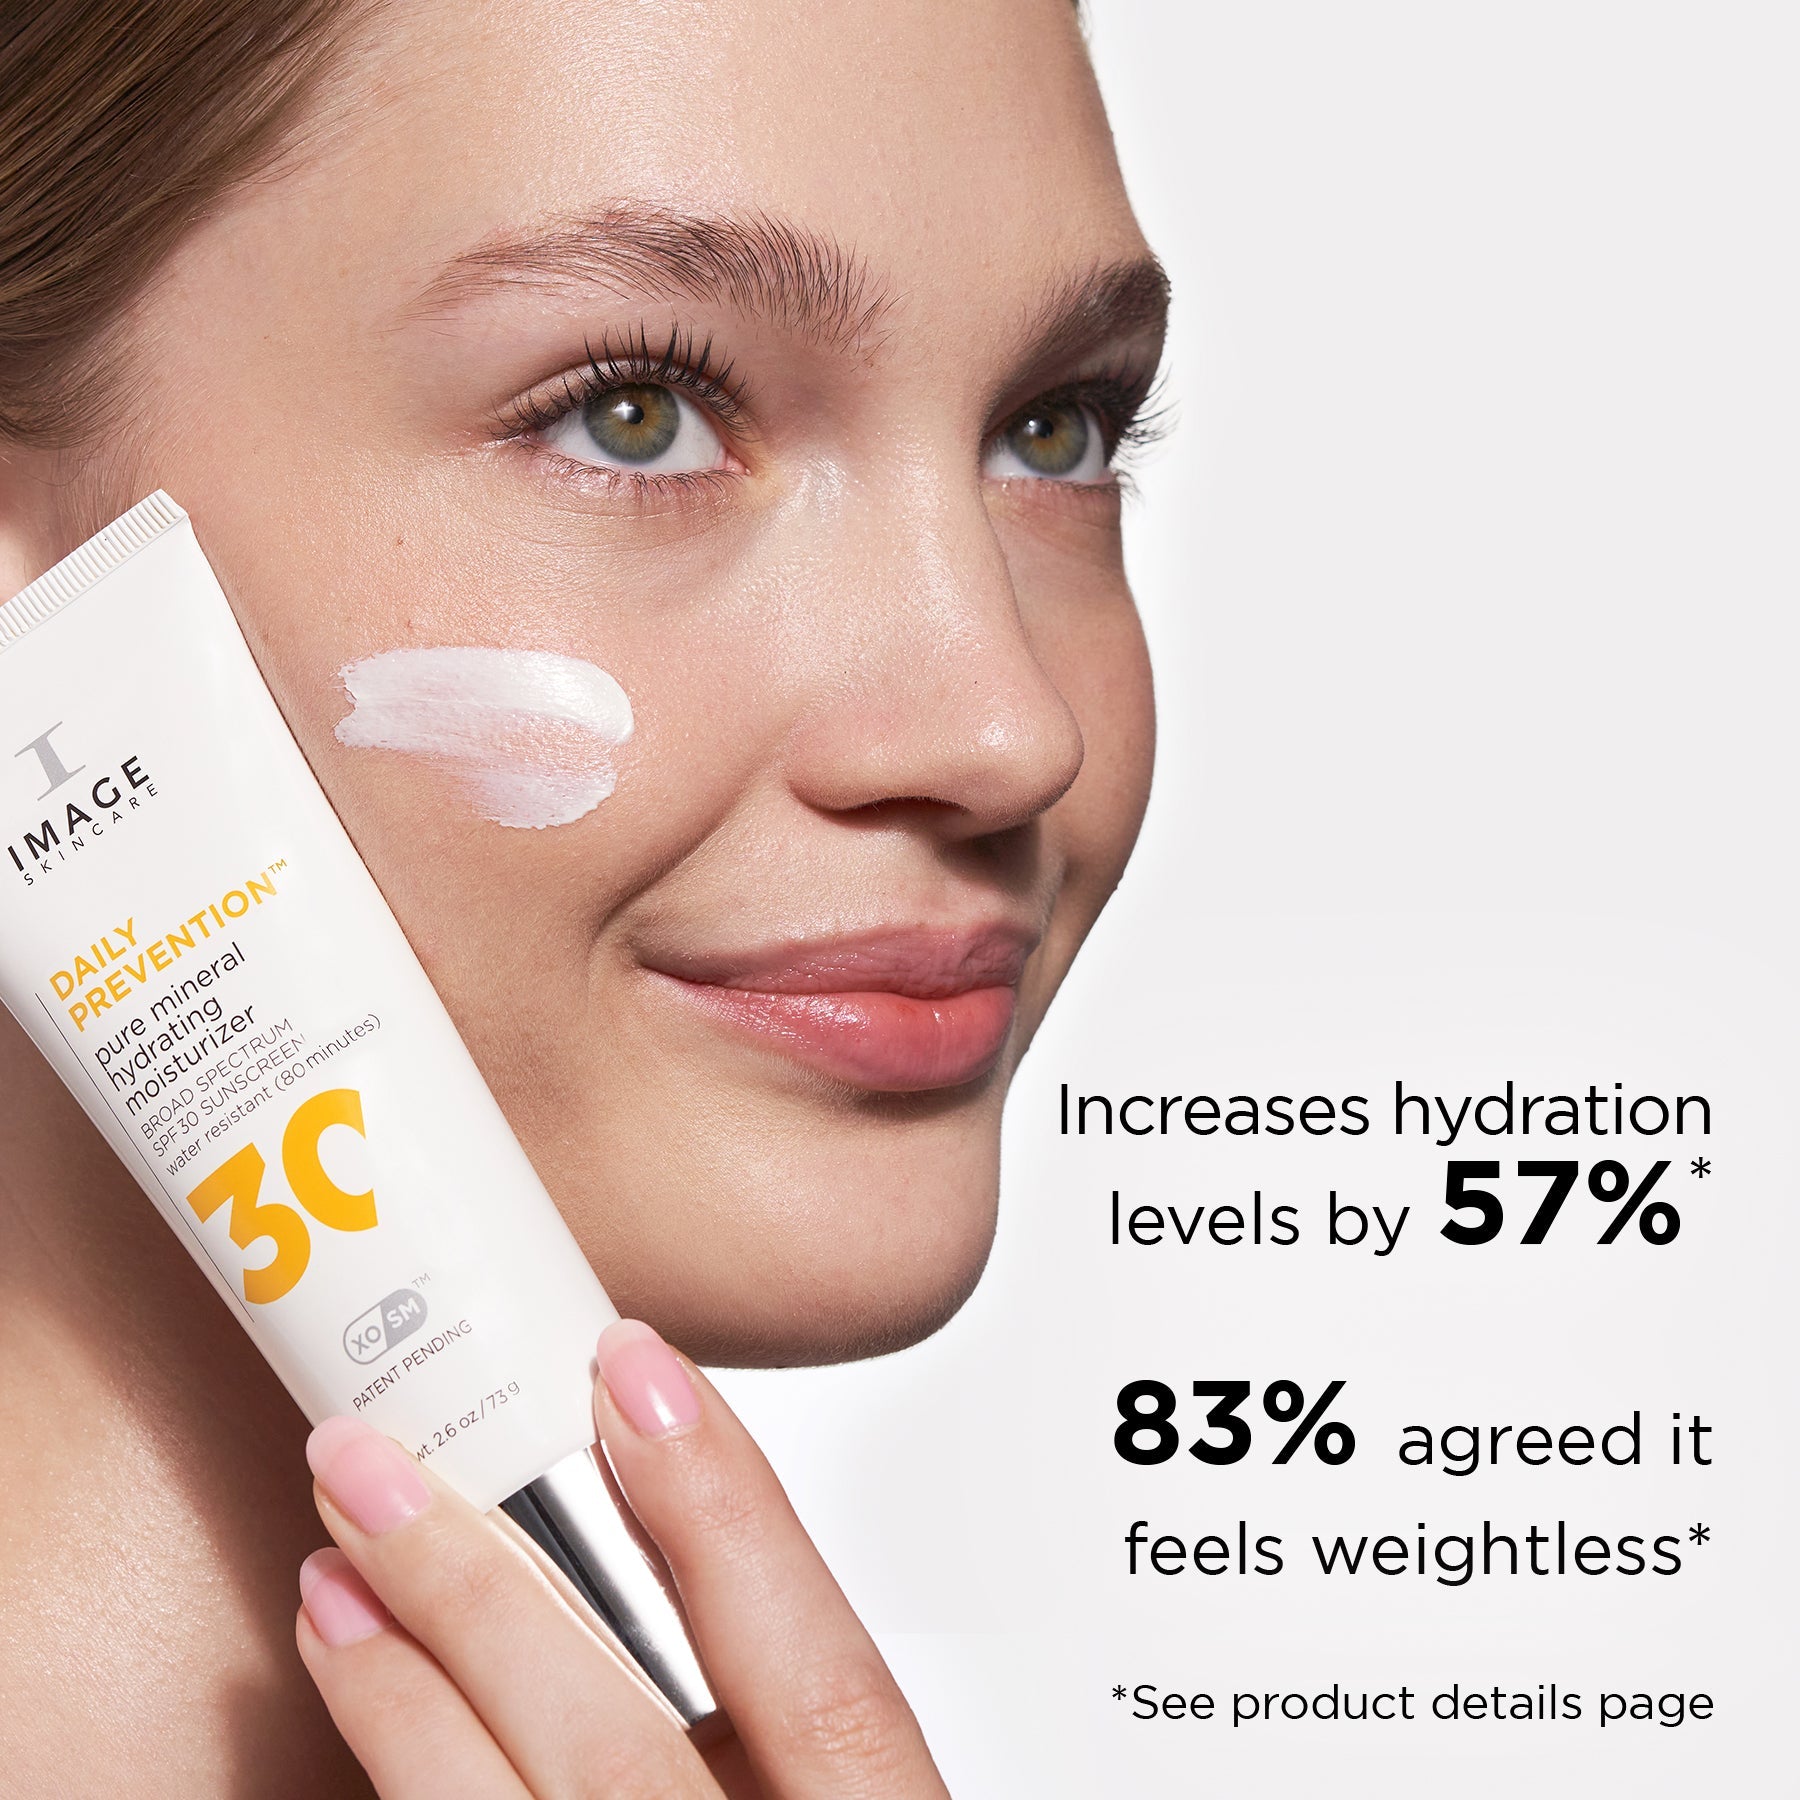 DAILY PREVENTION pure mineral hydrating moisturizer SPF 30